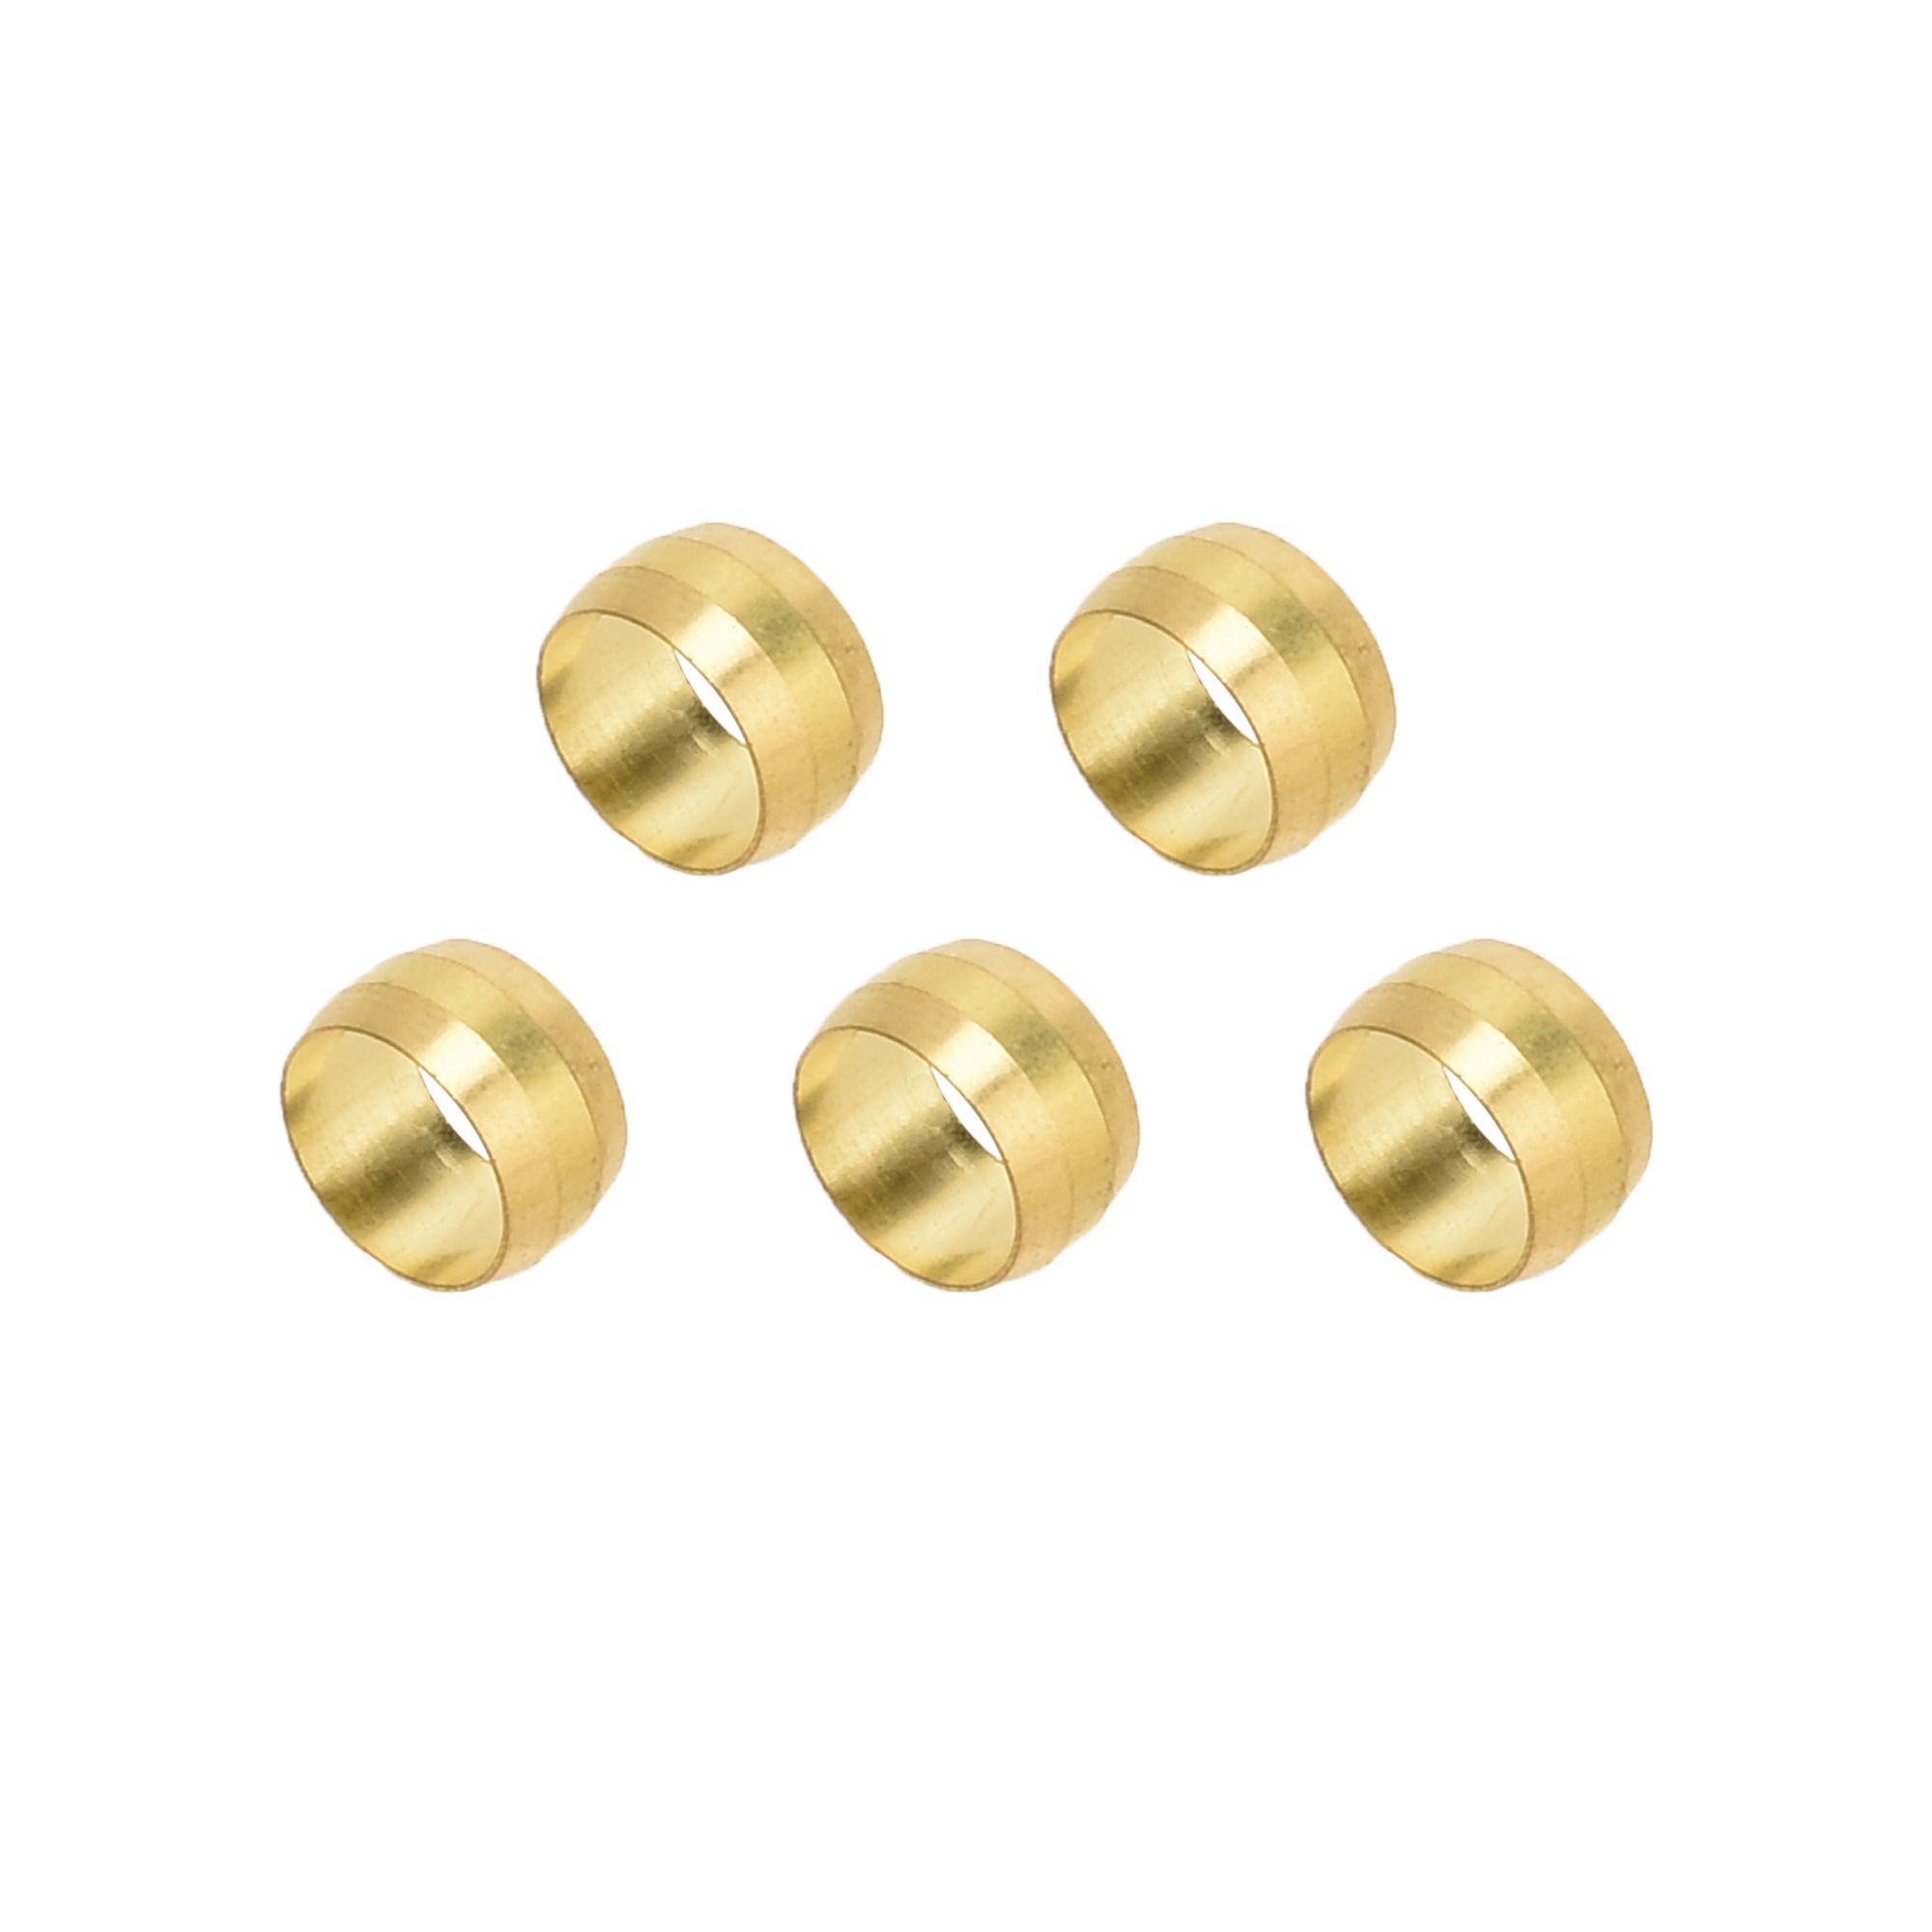 Flomasta Brass Compression Olive (Dia)10mm, Pack of 5